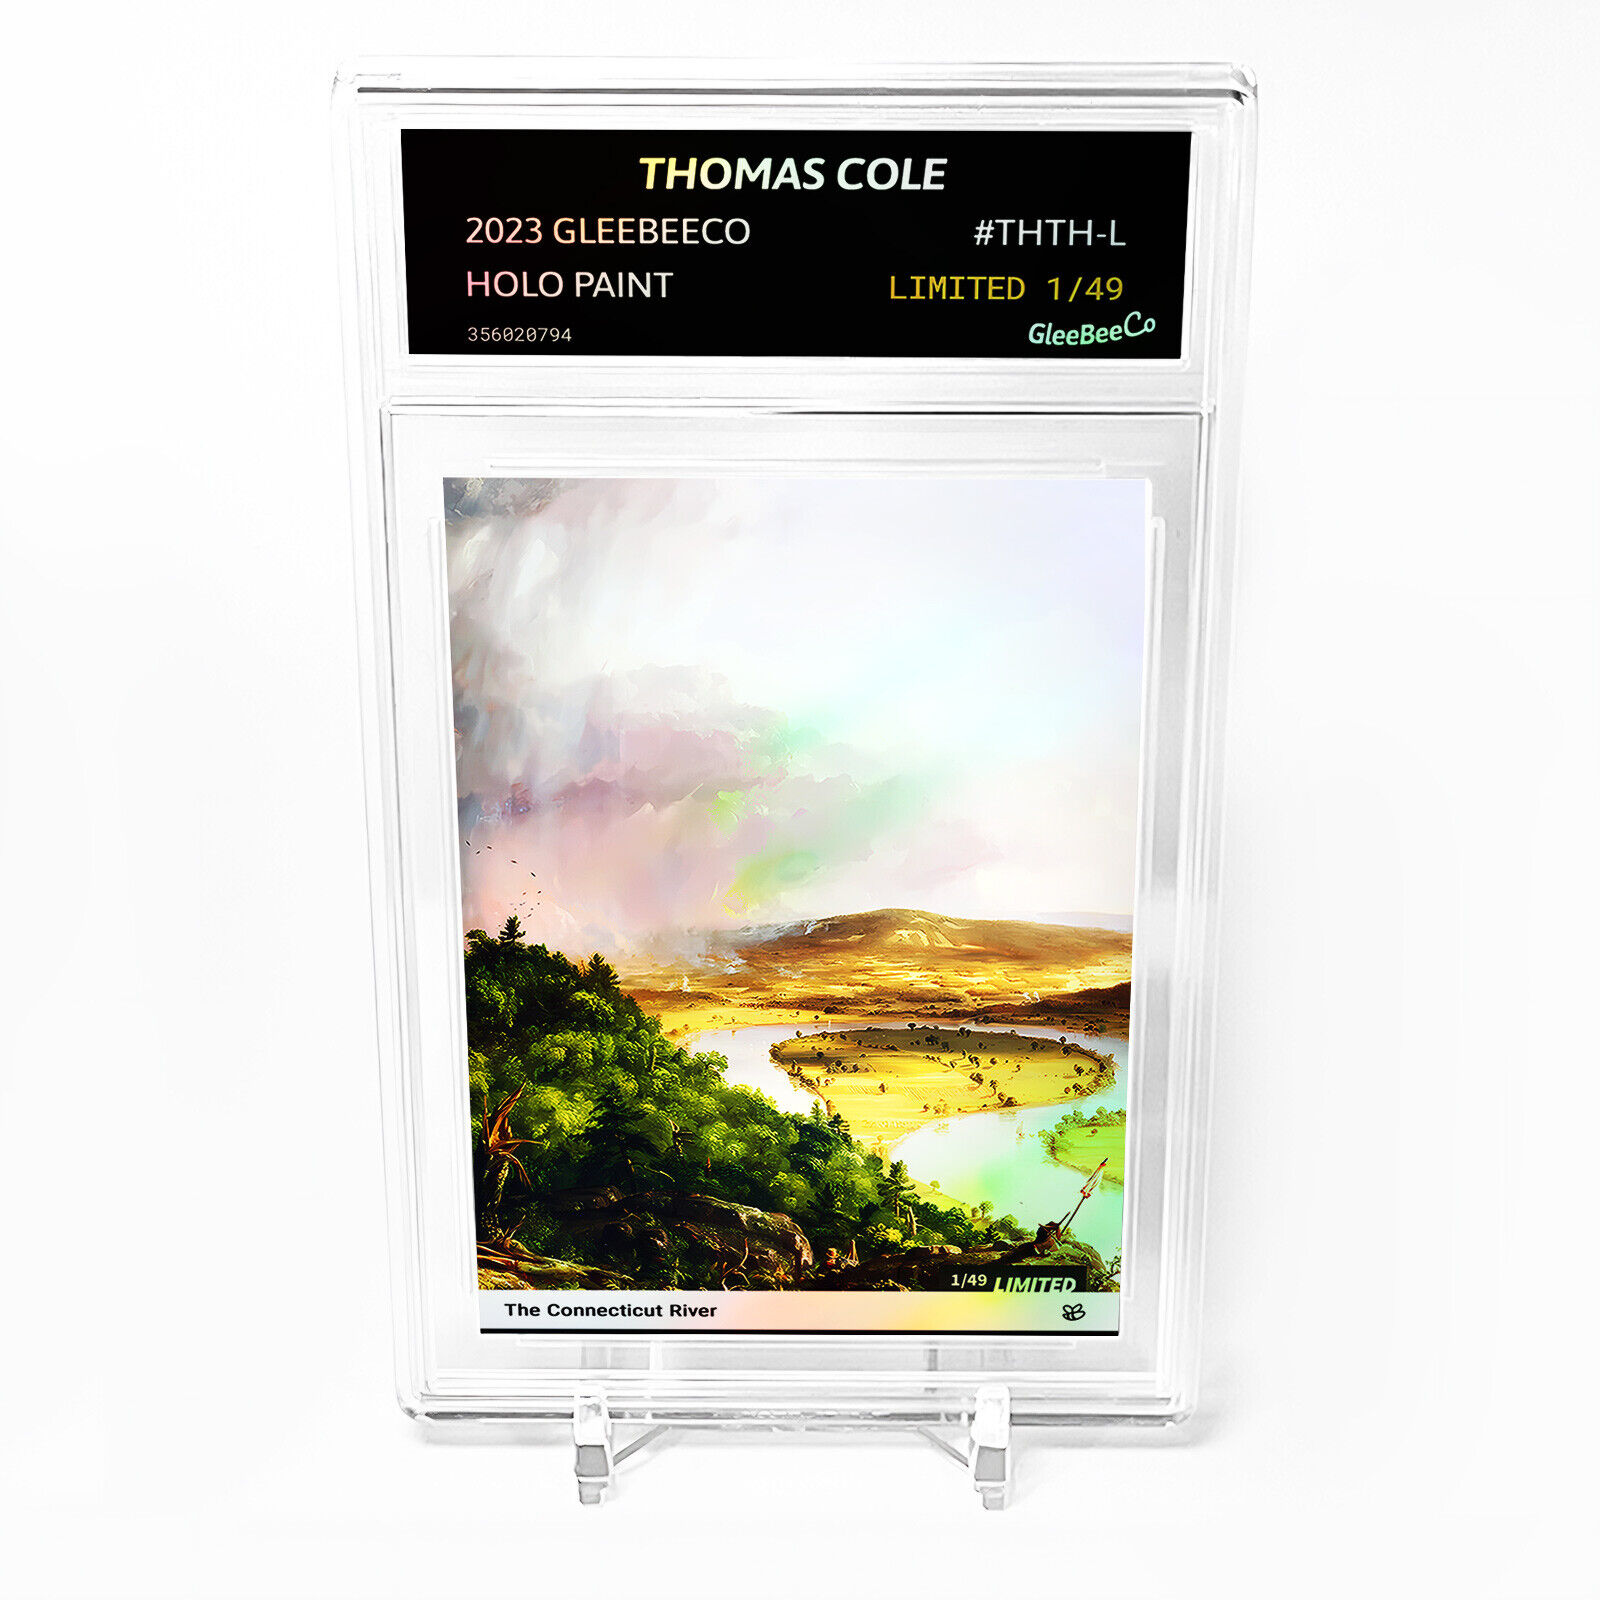 THE CONNECTICUT RIVER Thomas Cole Card 2023 GleeBeeCo Holo Painting #THTH-L /49